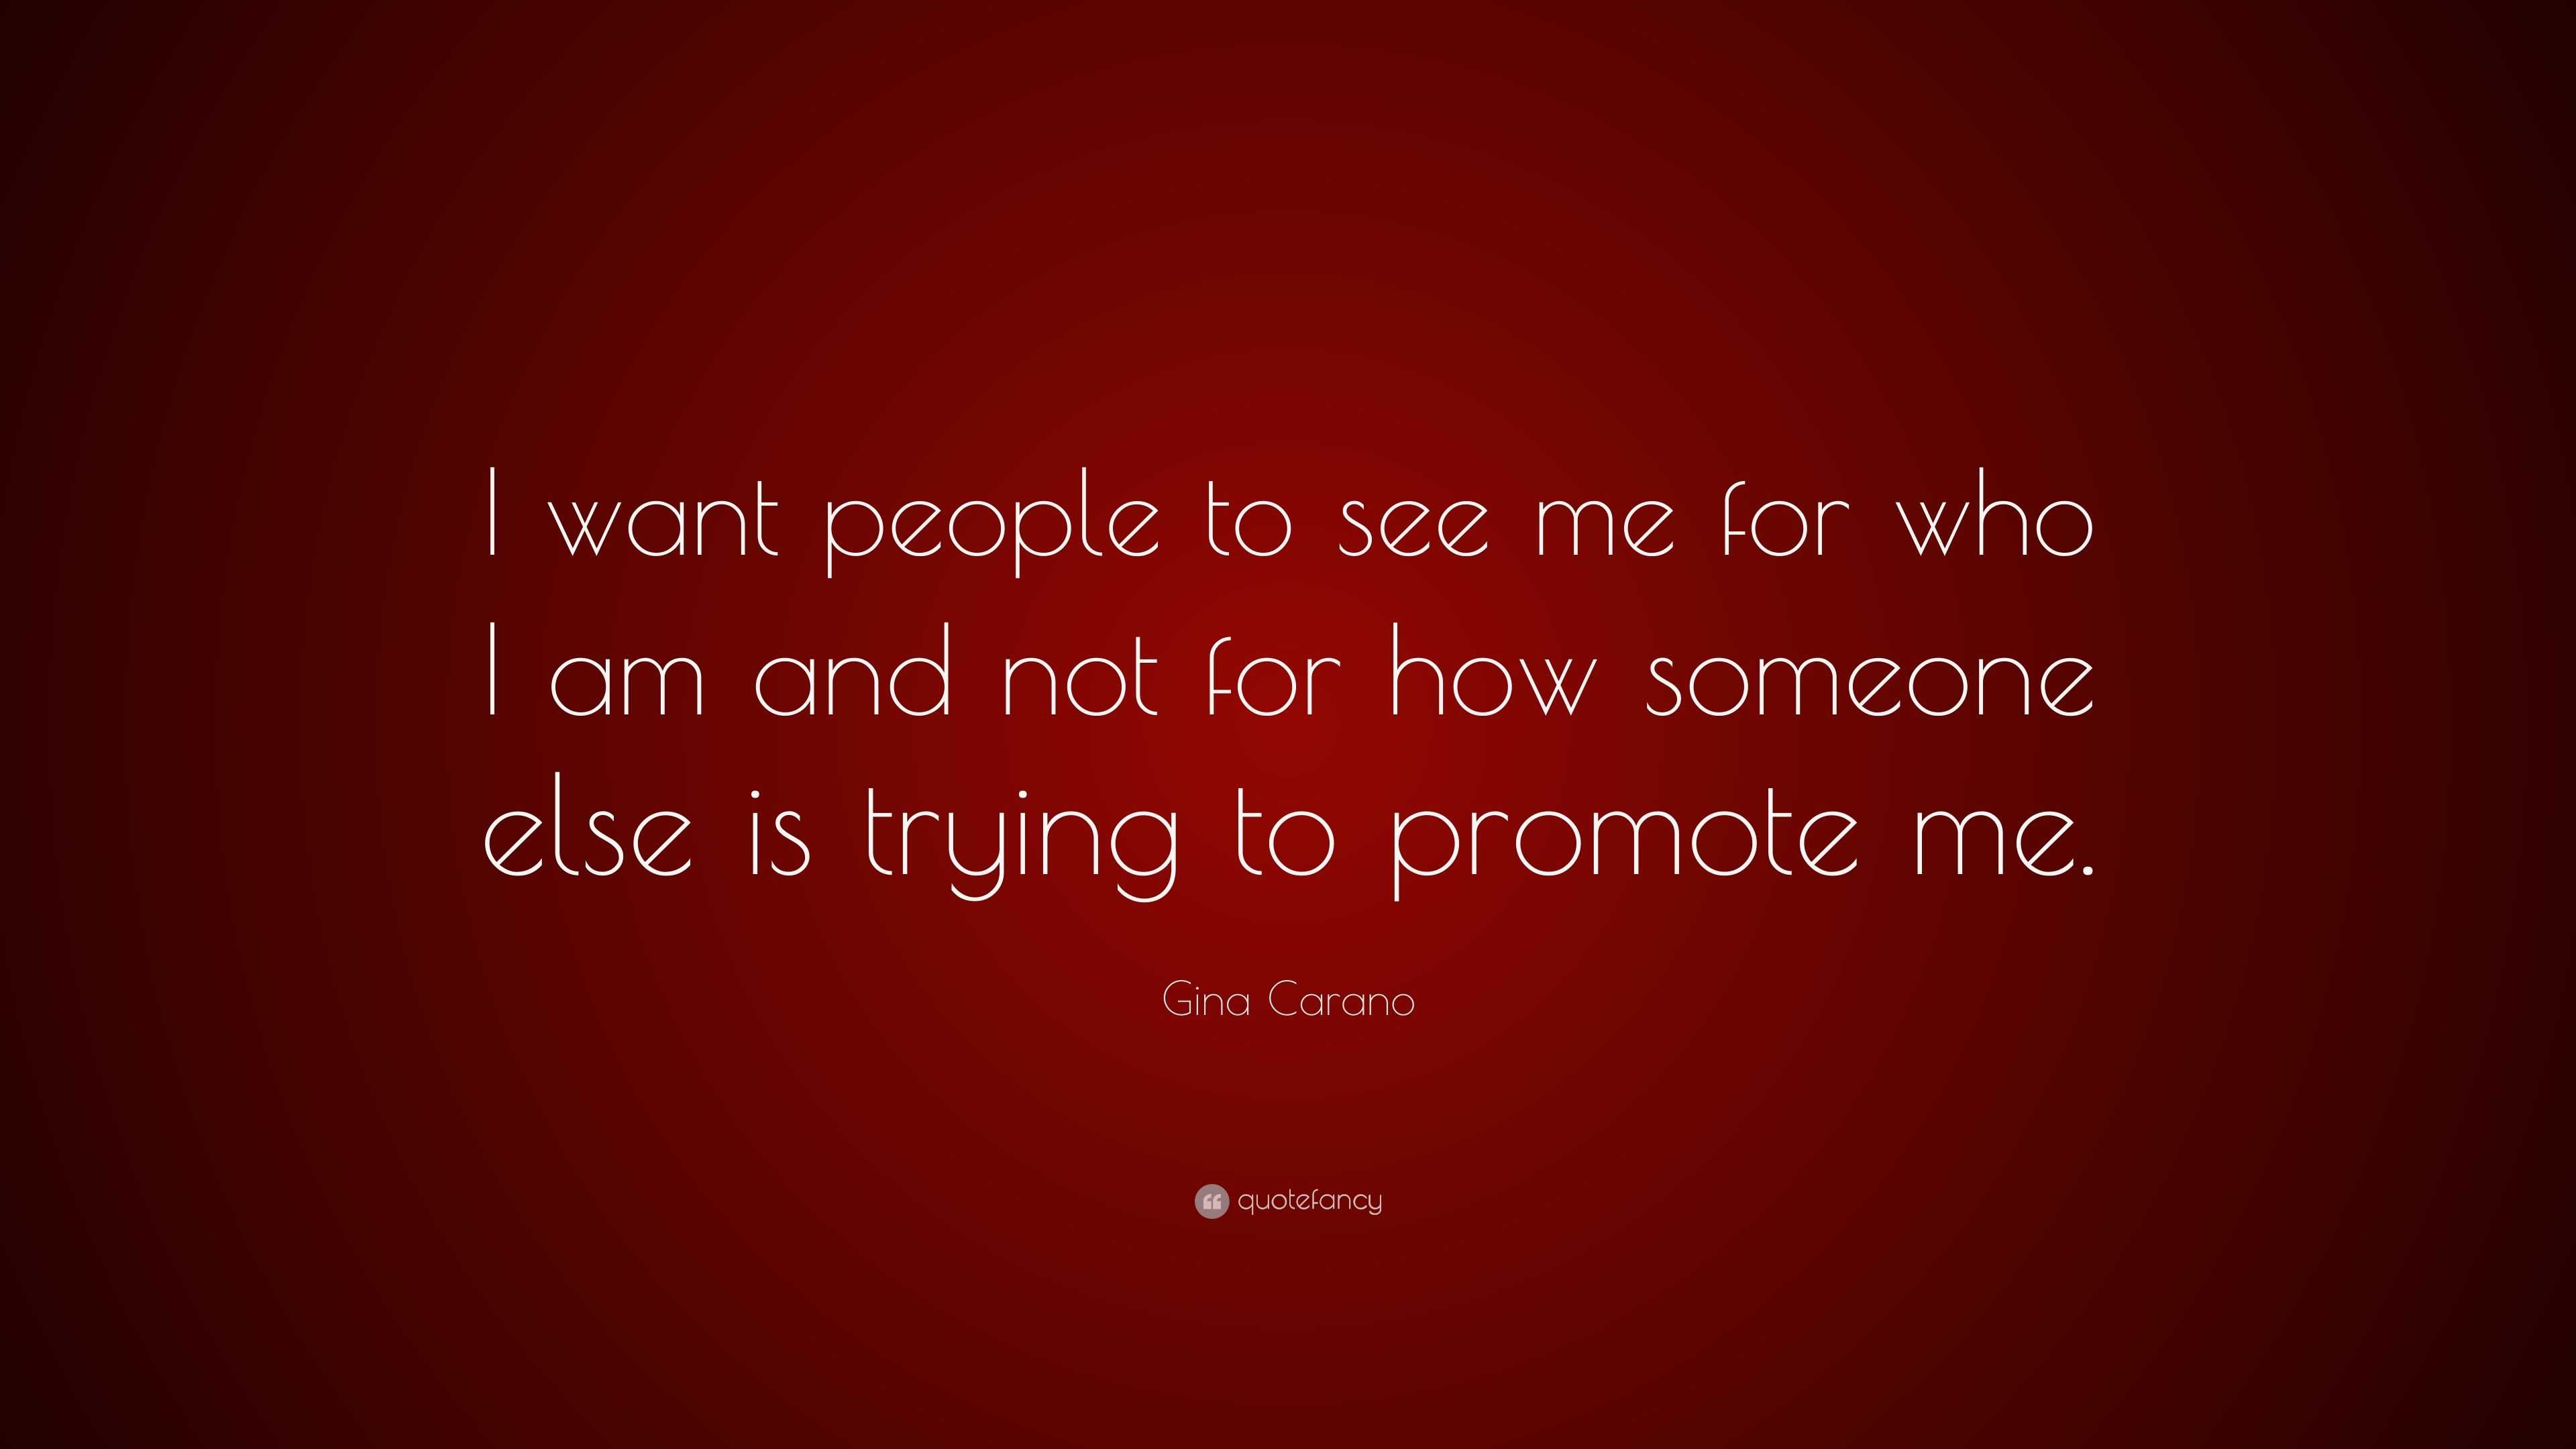 Gina Carano Quote: “I want people to see me for who I am and not for ...